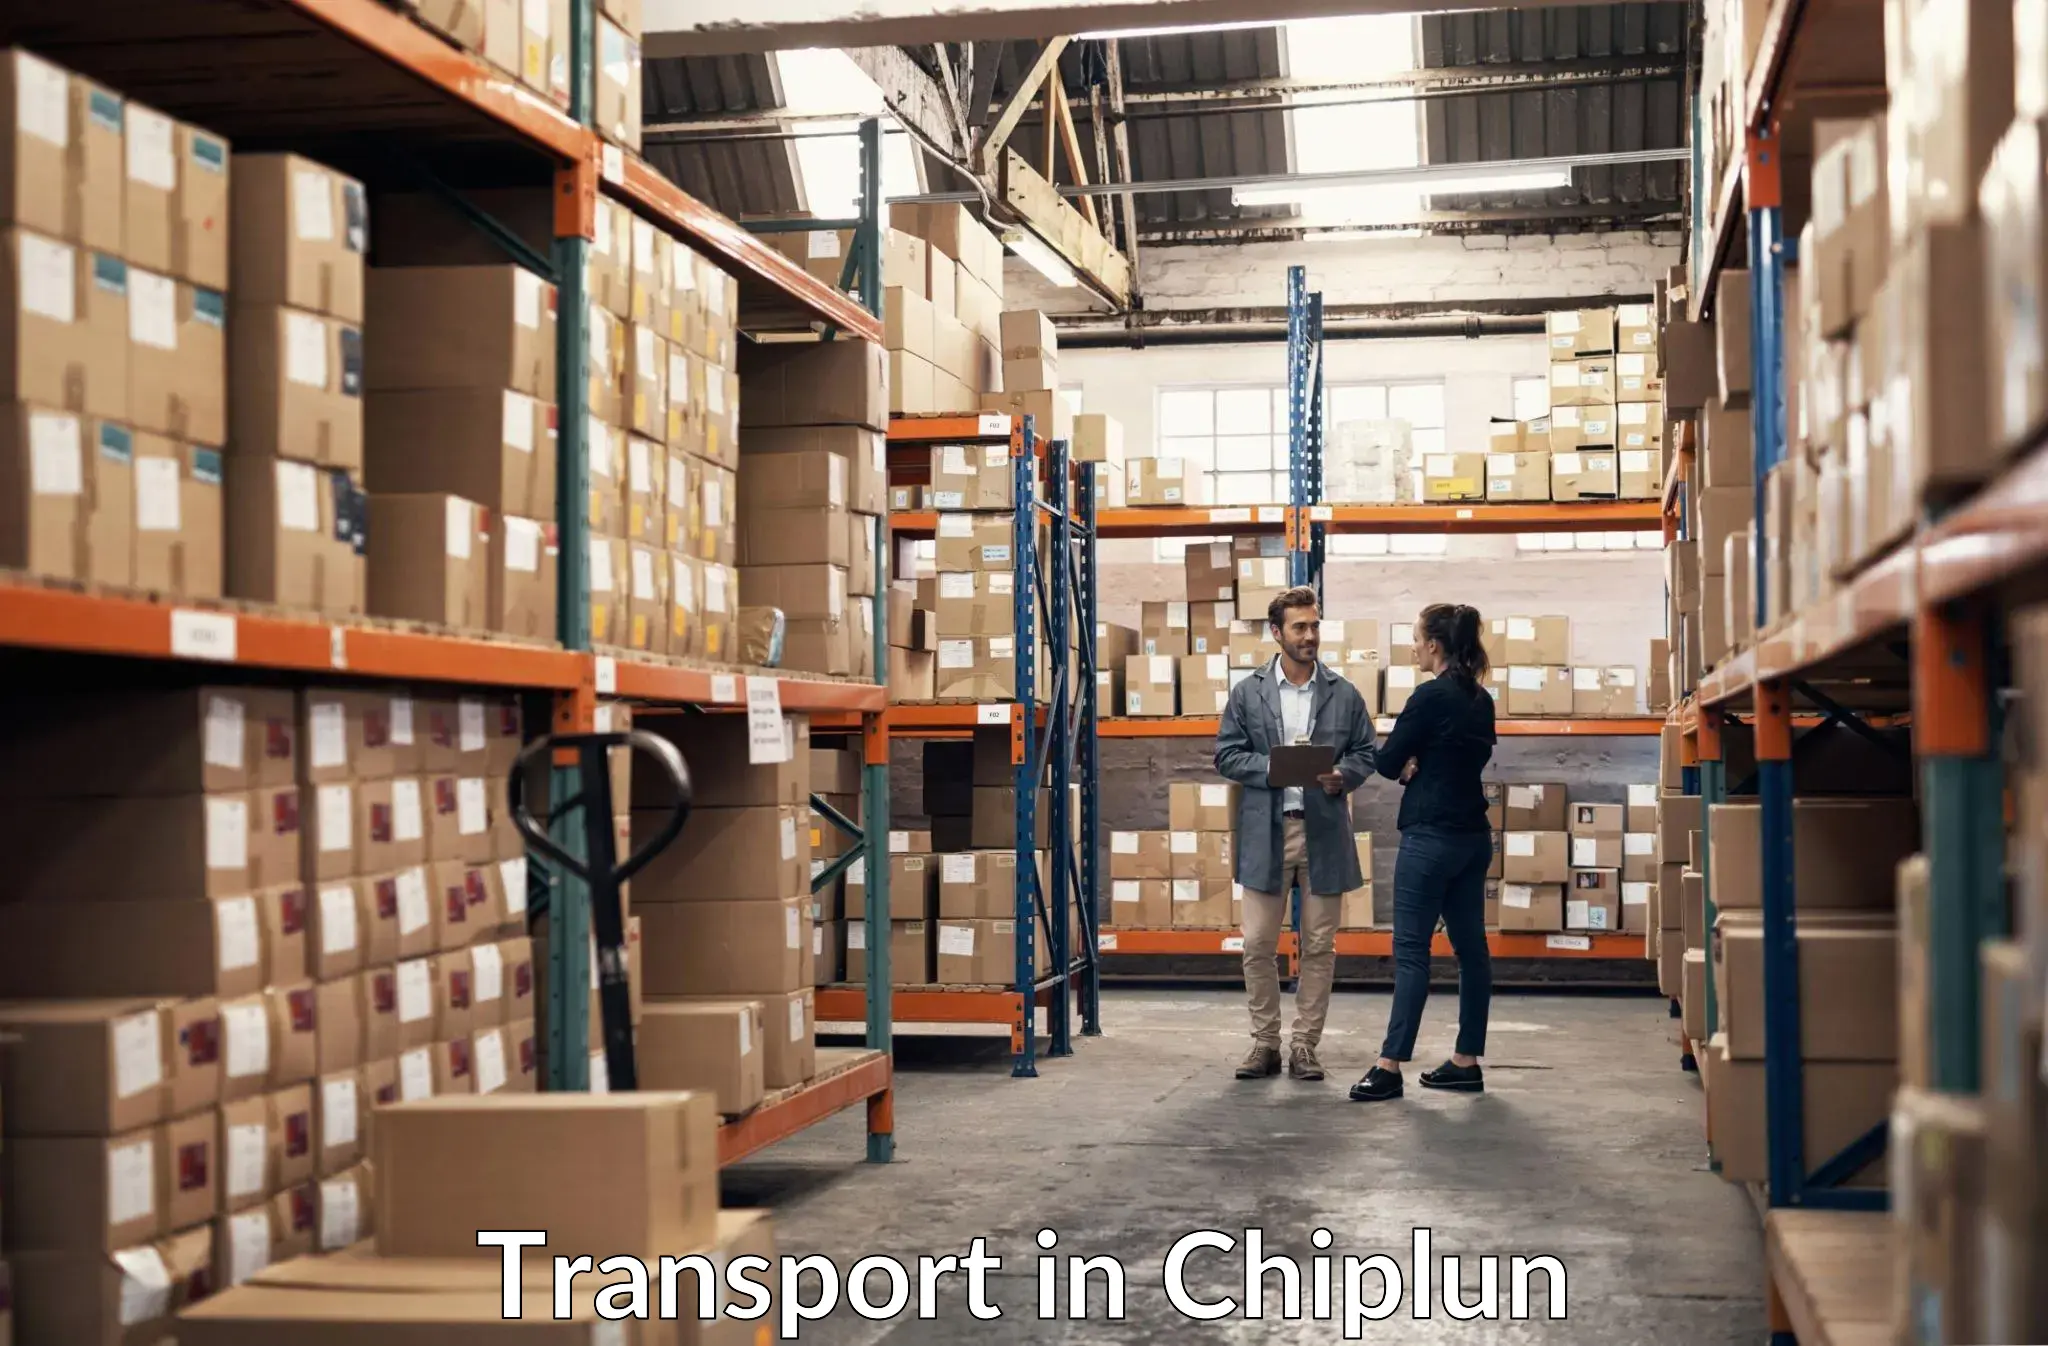 Vehicle transport services in Chiplun